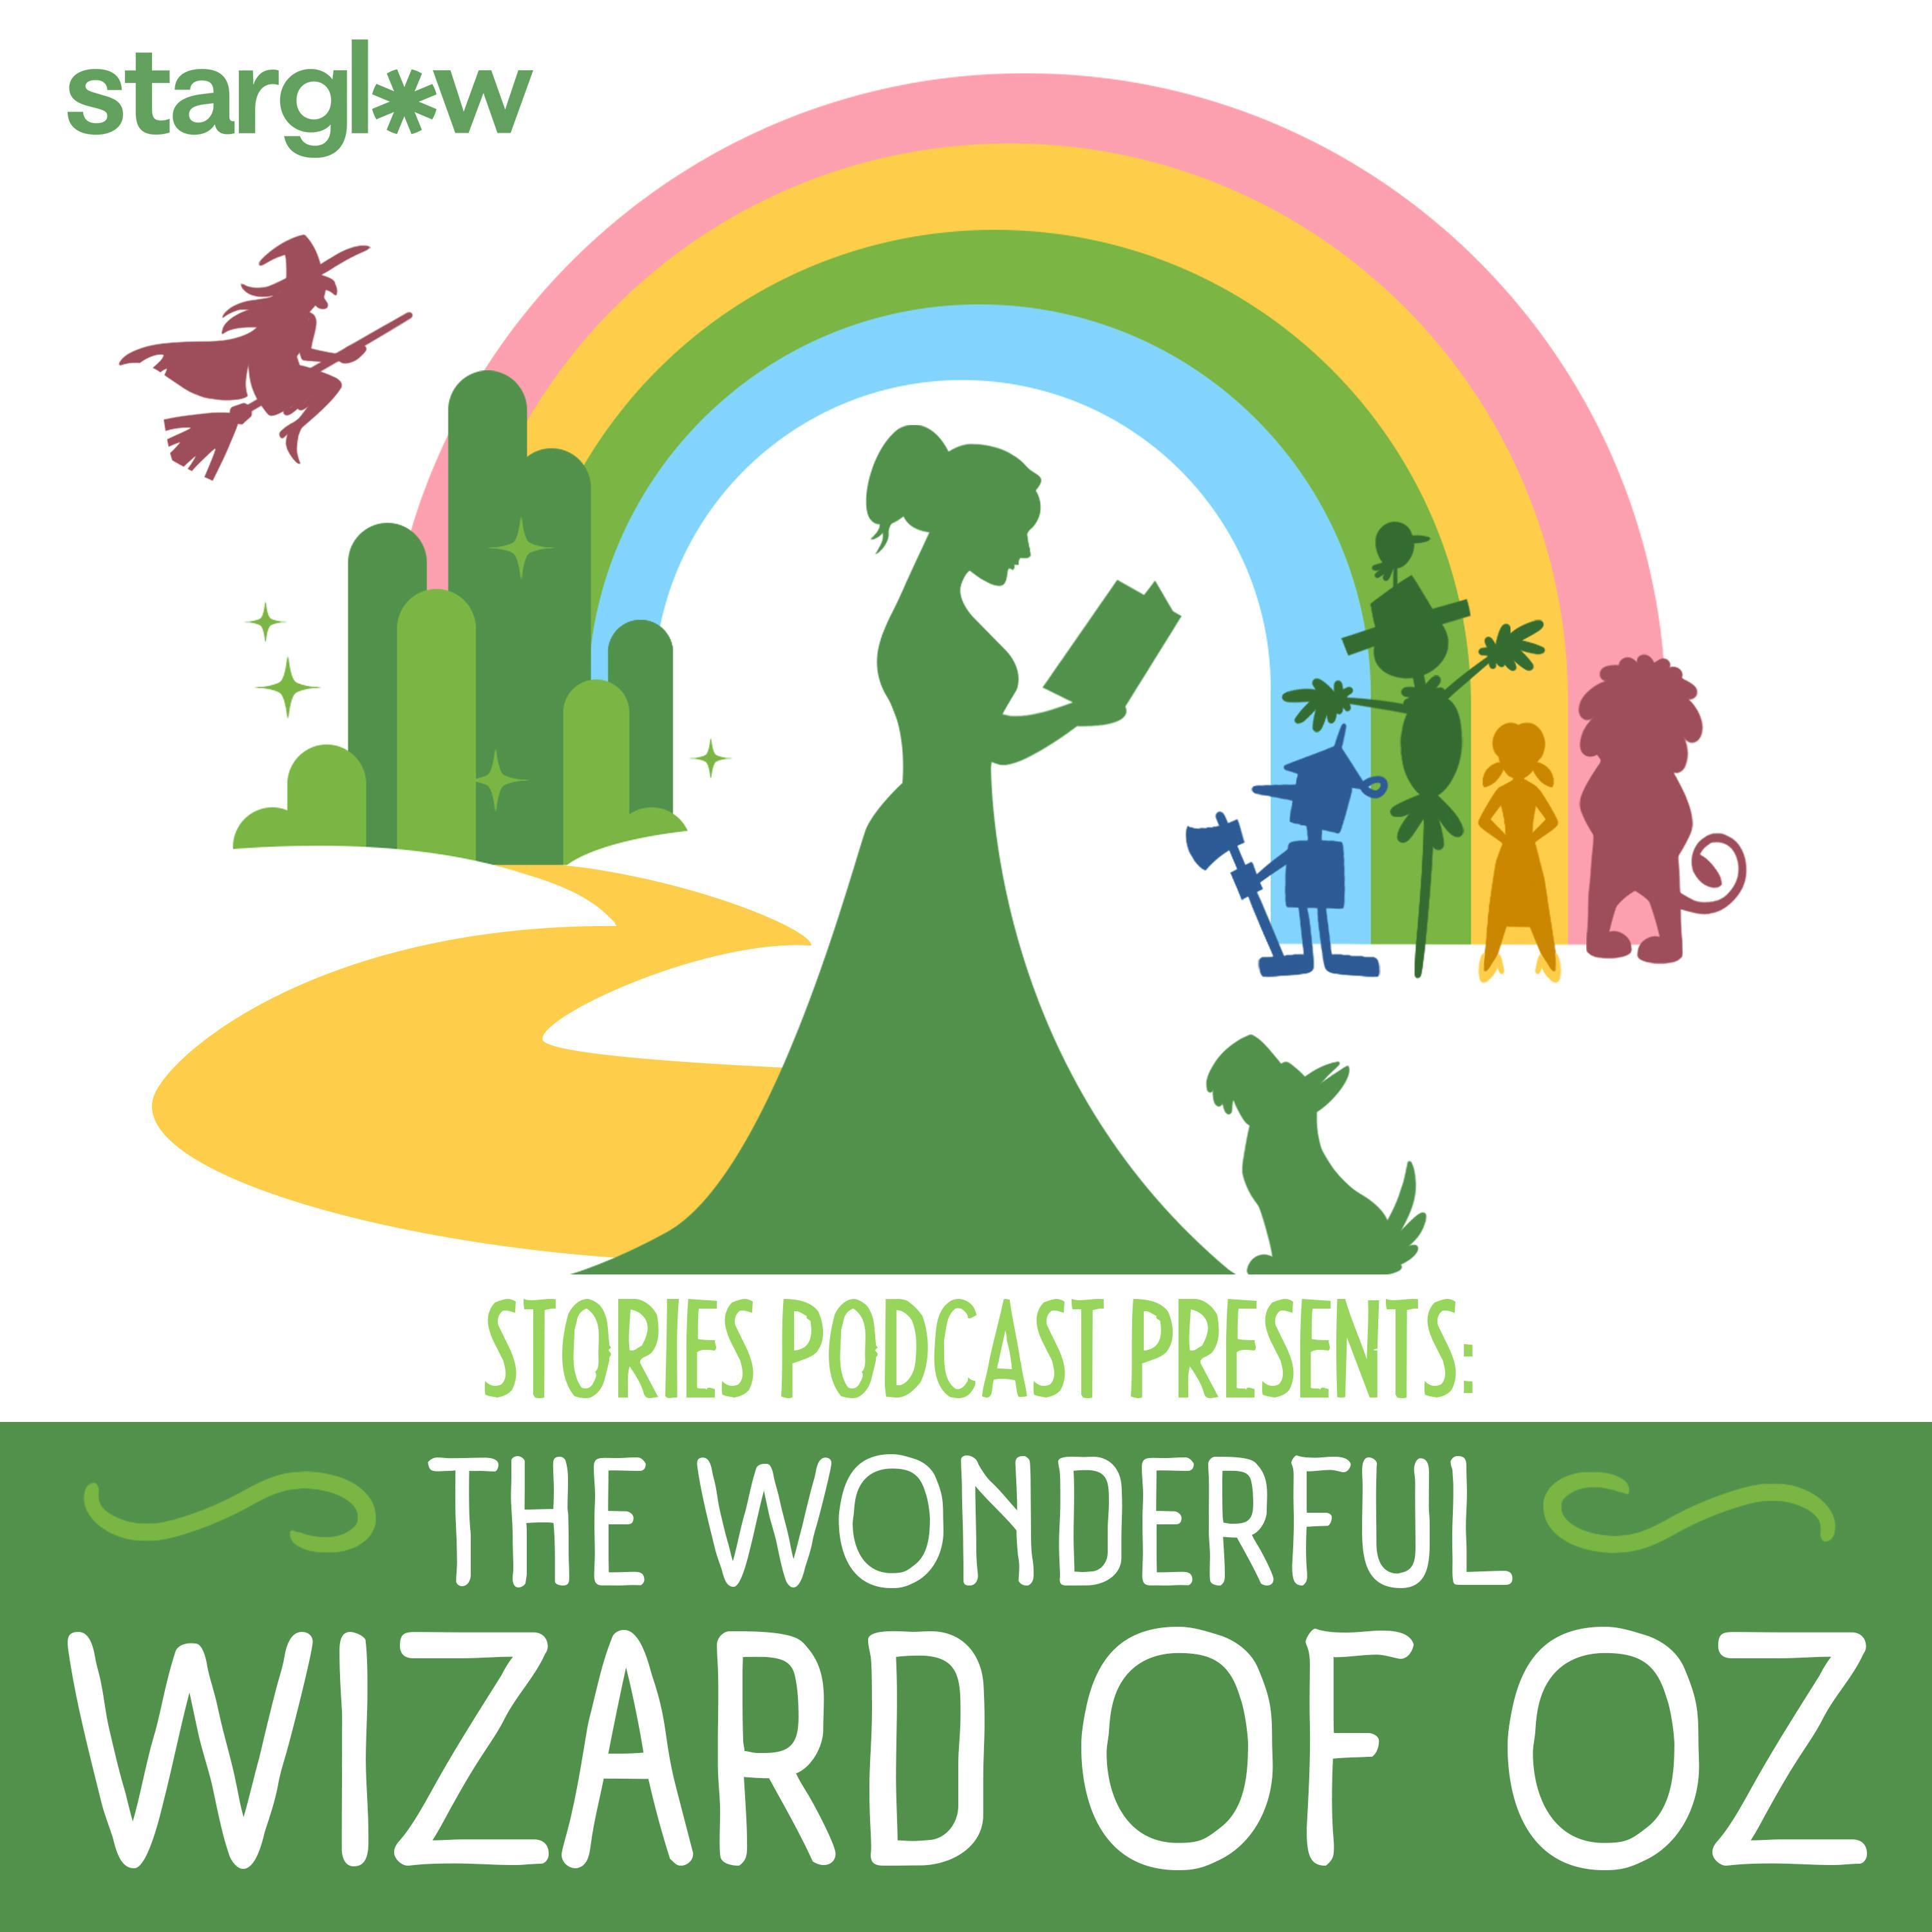 Stories Podcast Presents: The Wonderful Wizard of Oz - Starglow Plus podcast tile